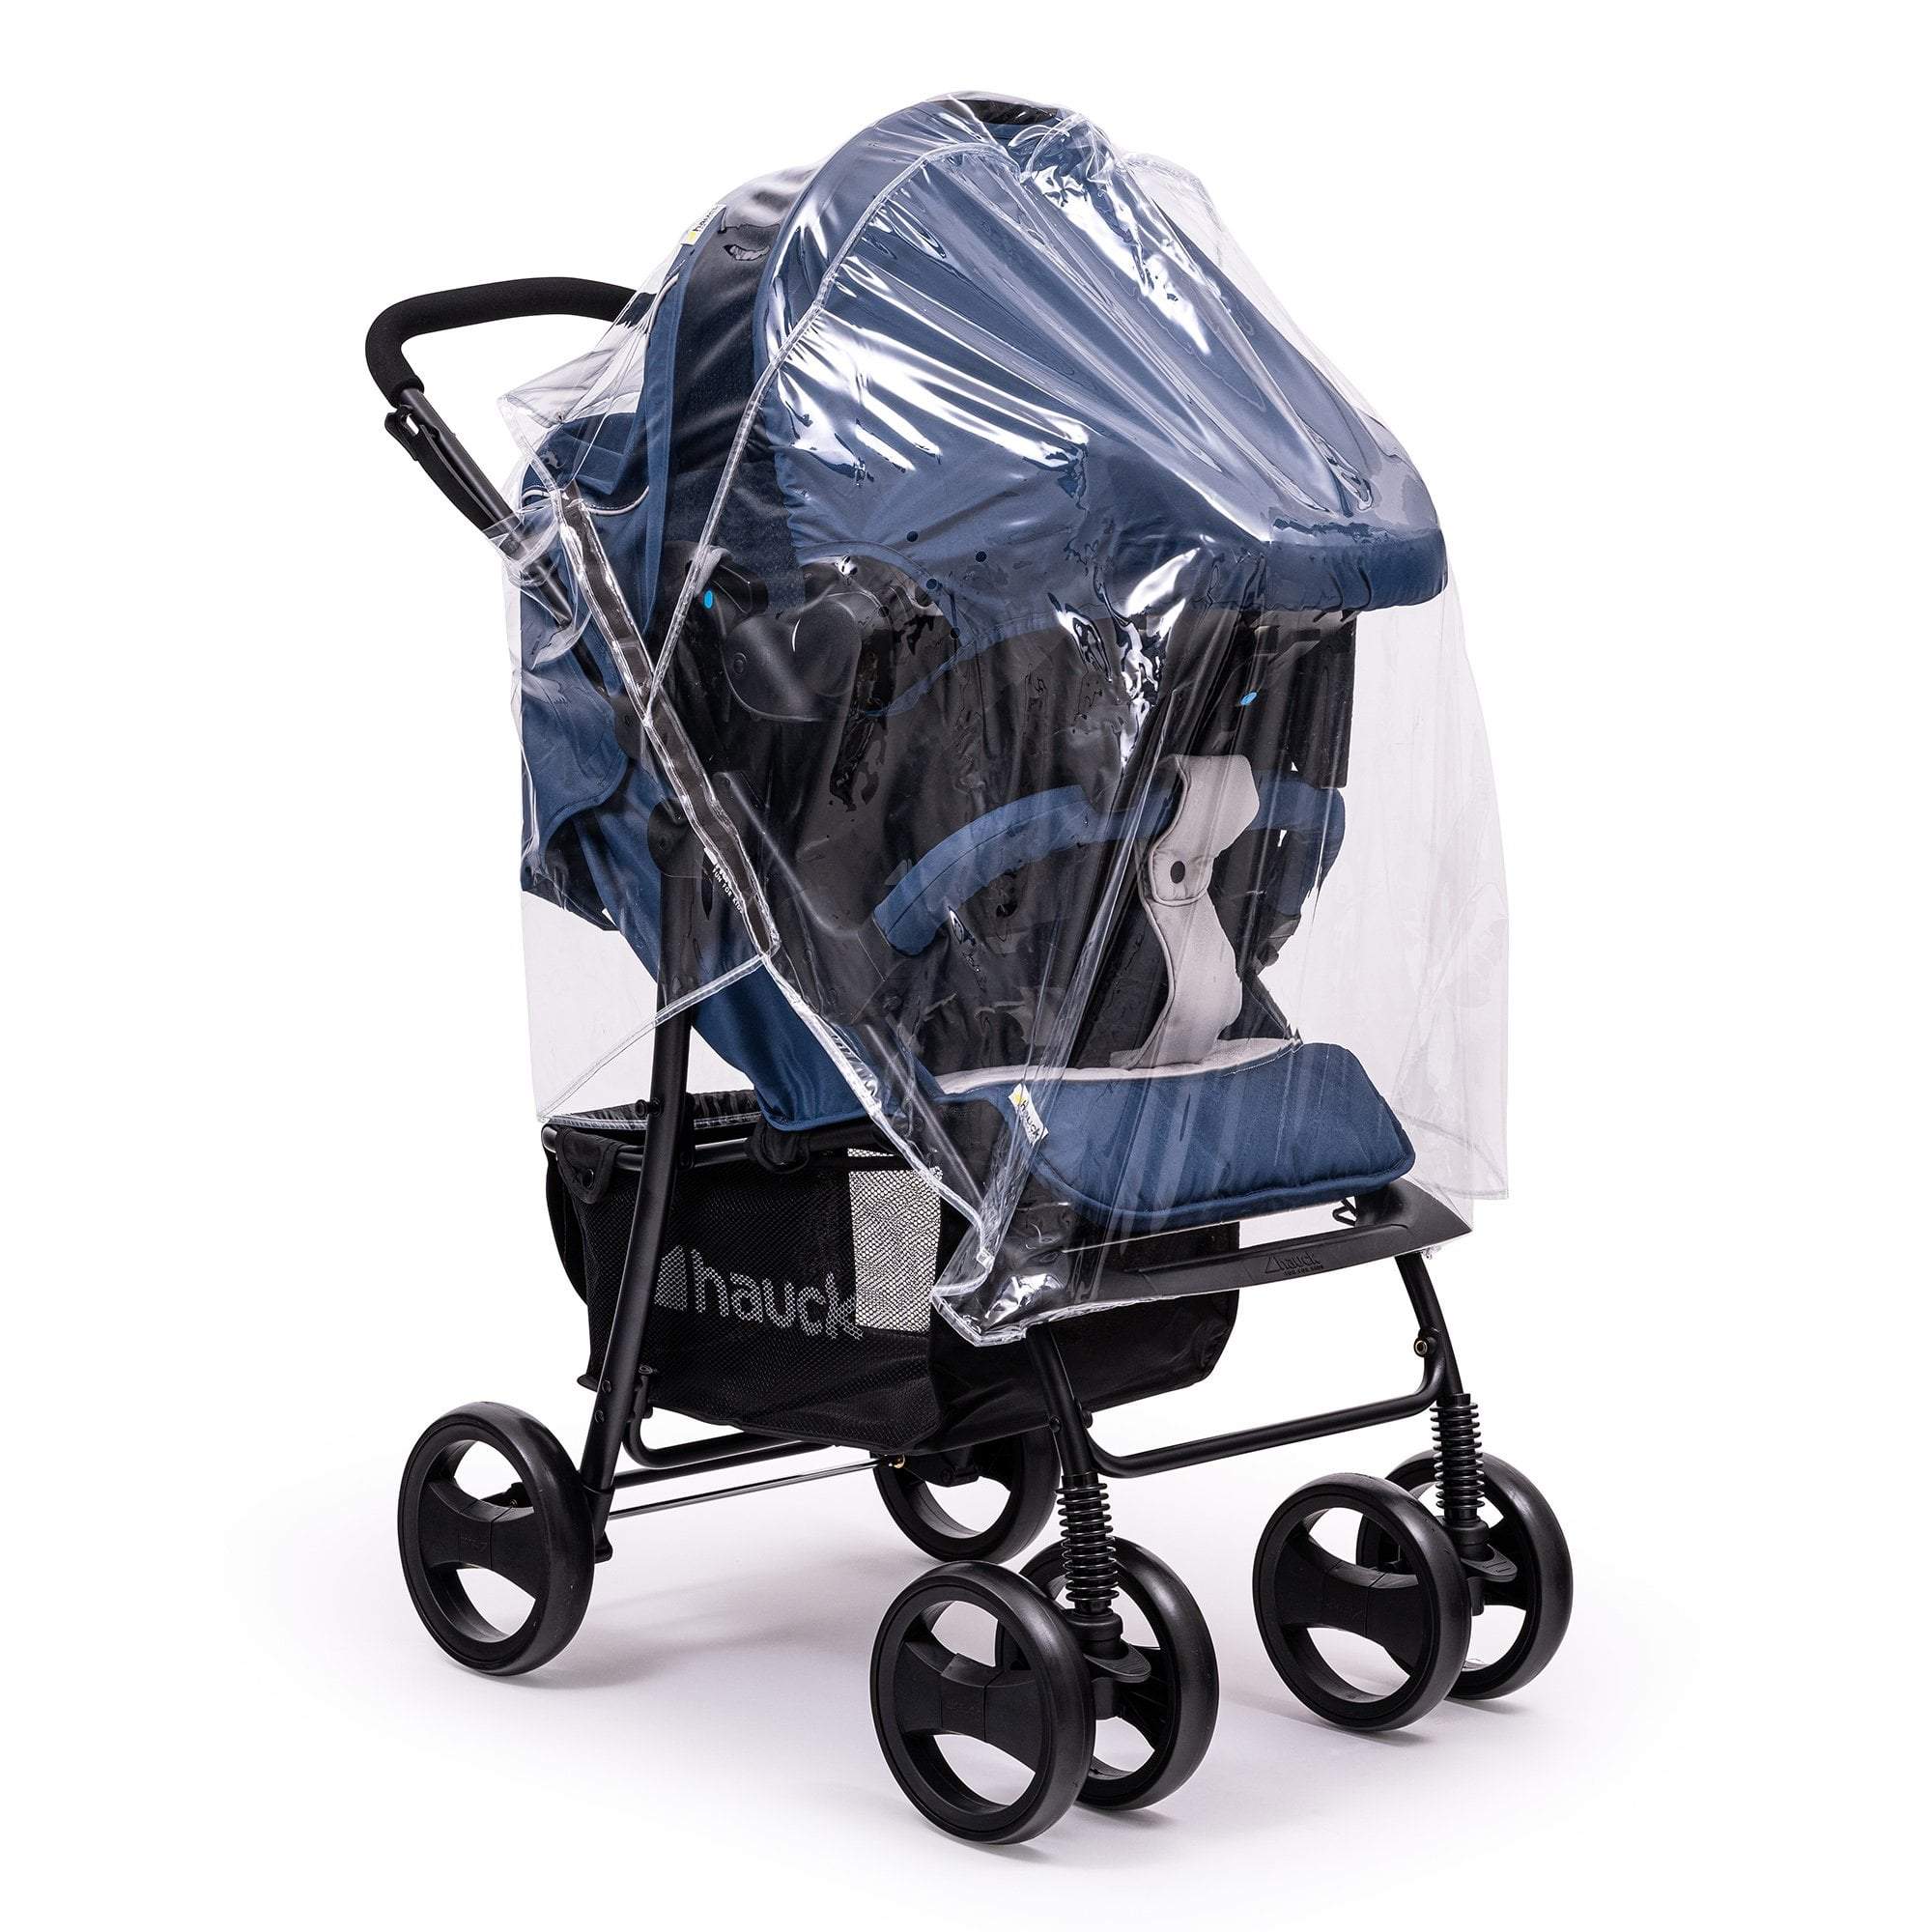 Travel System Raincover Compatible with Nania - Fits All Models - For Your Little One